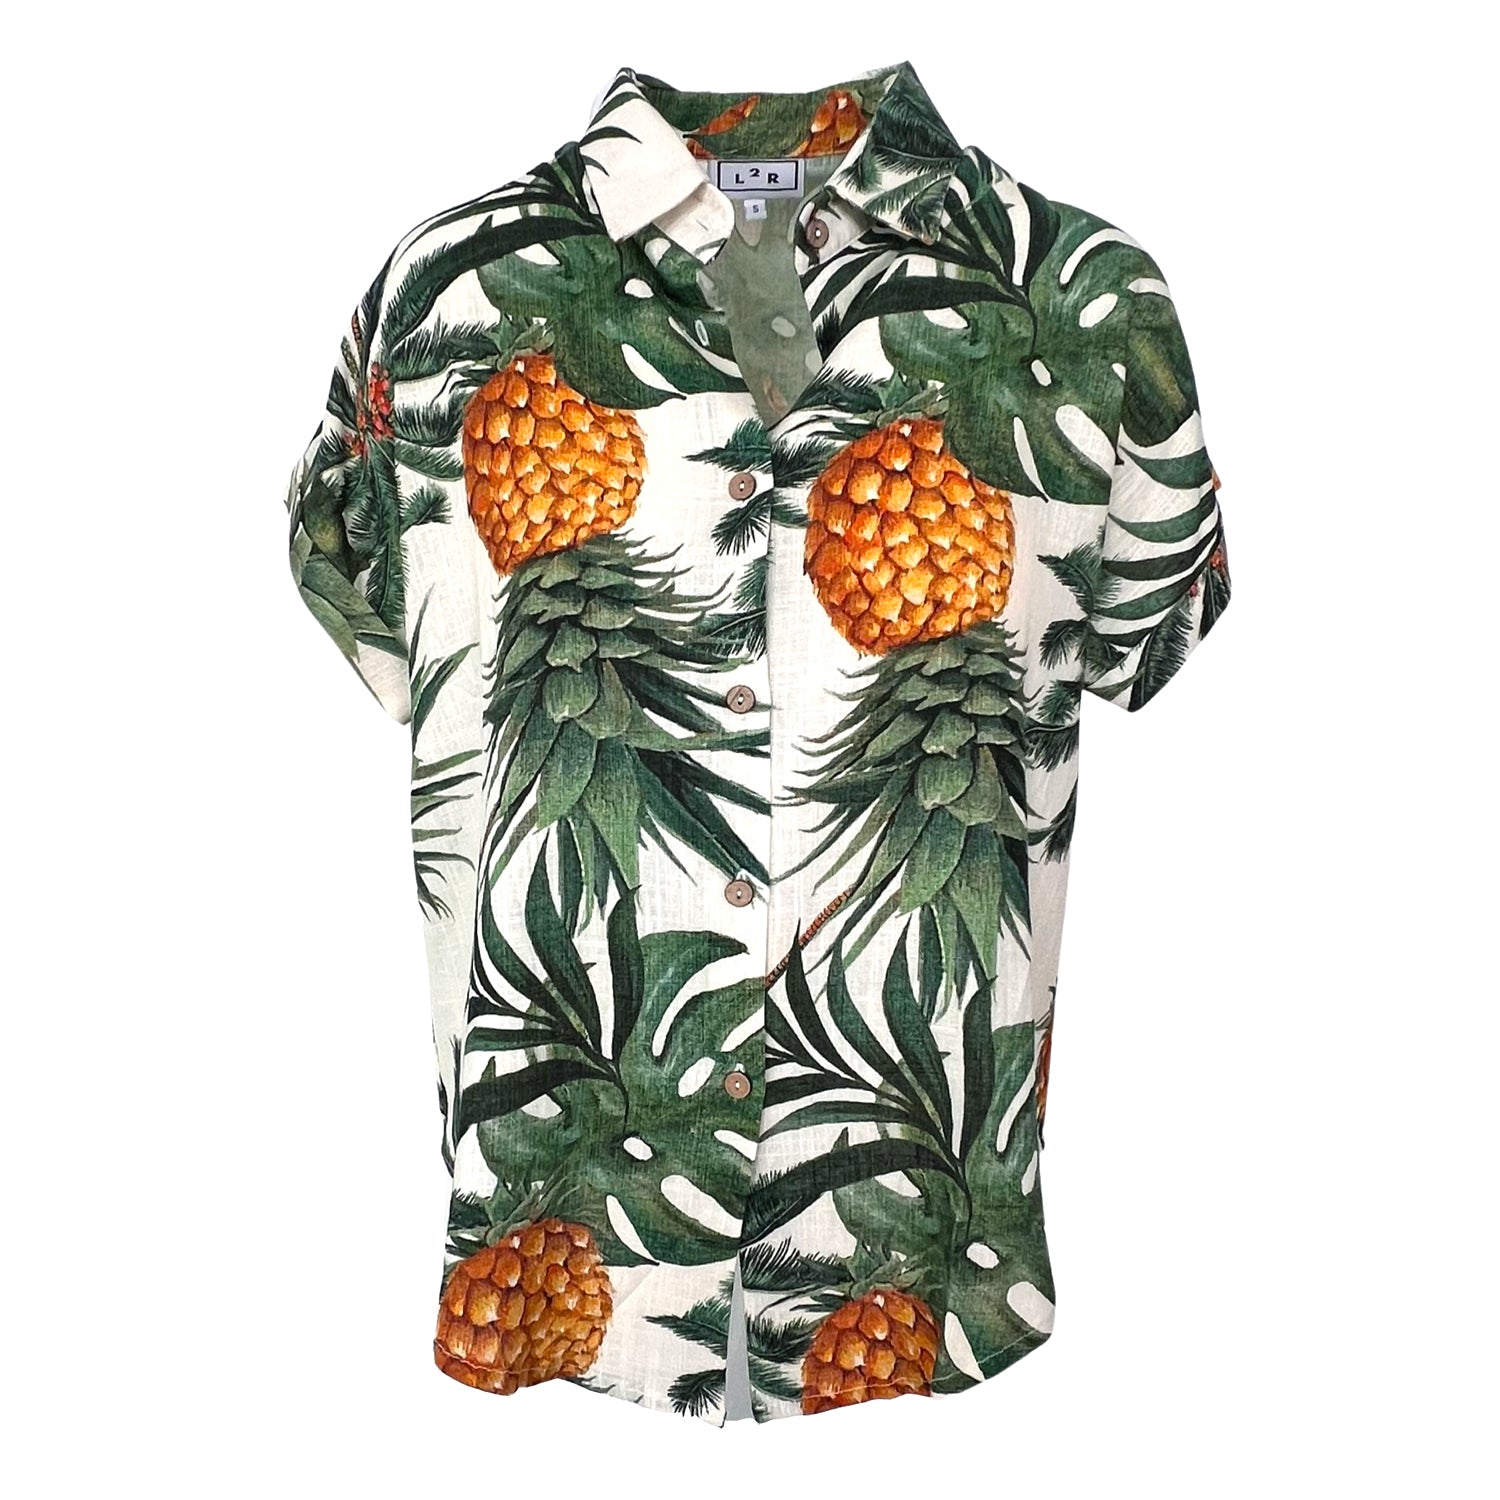 L2r The Label Women's Neutrals / Green / Yellow Short-sleeved Linen Shirt - Leaves & Pineapple Print In Multi